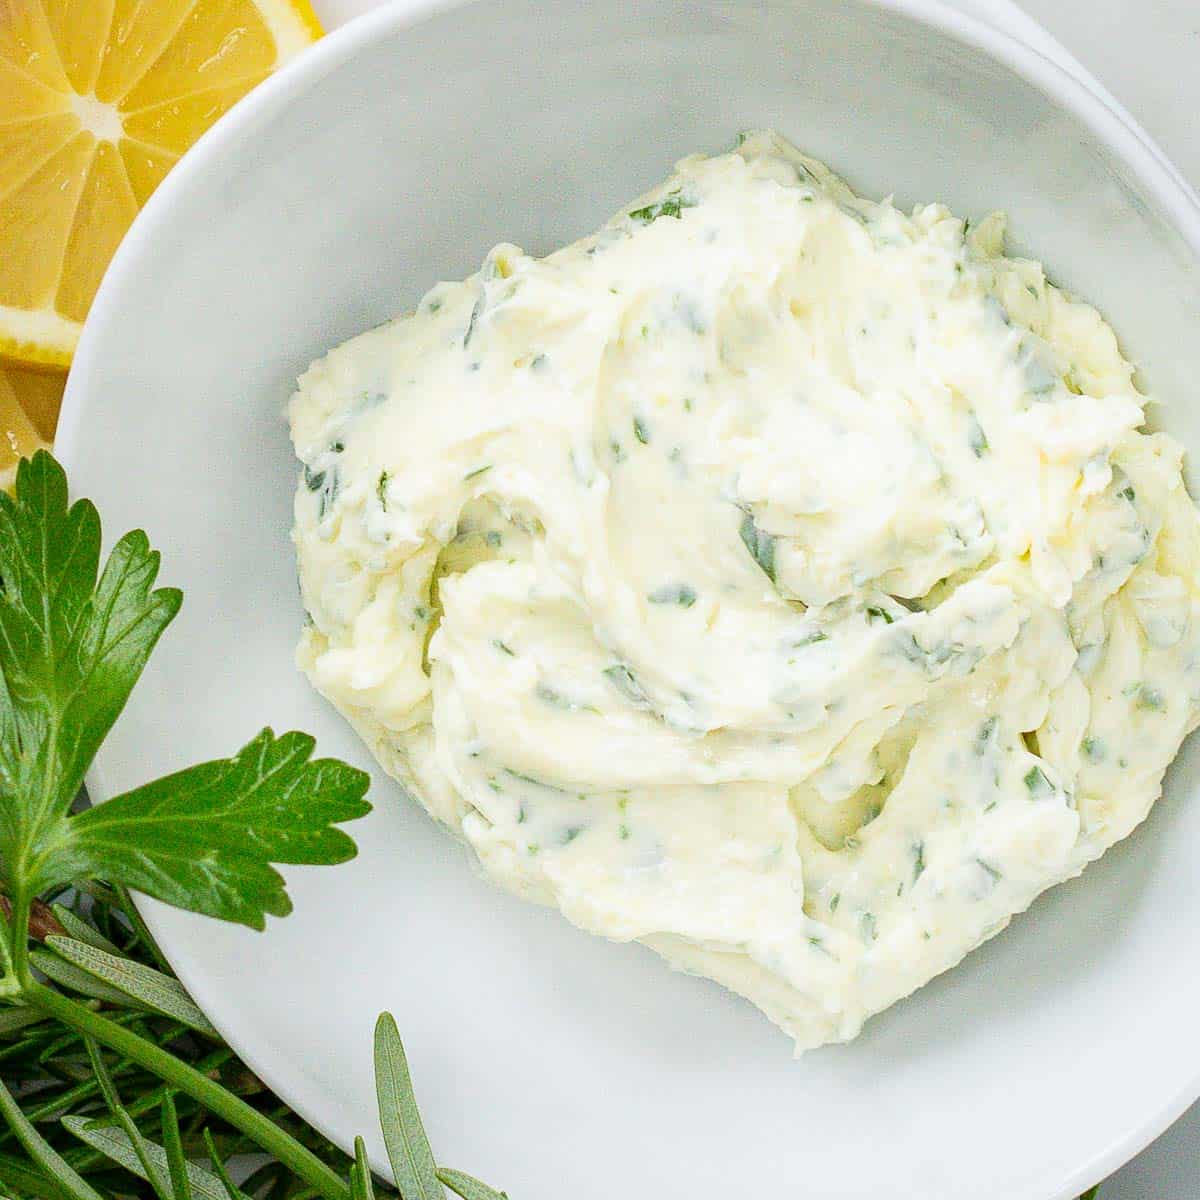 Herb butter in white dish with lemon and parsley on left side.